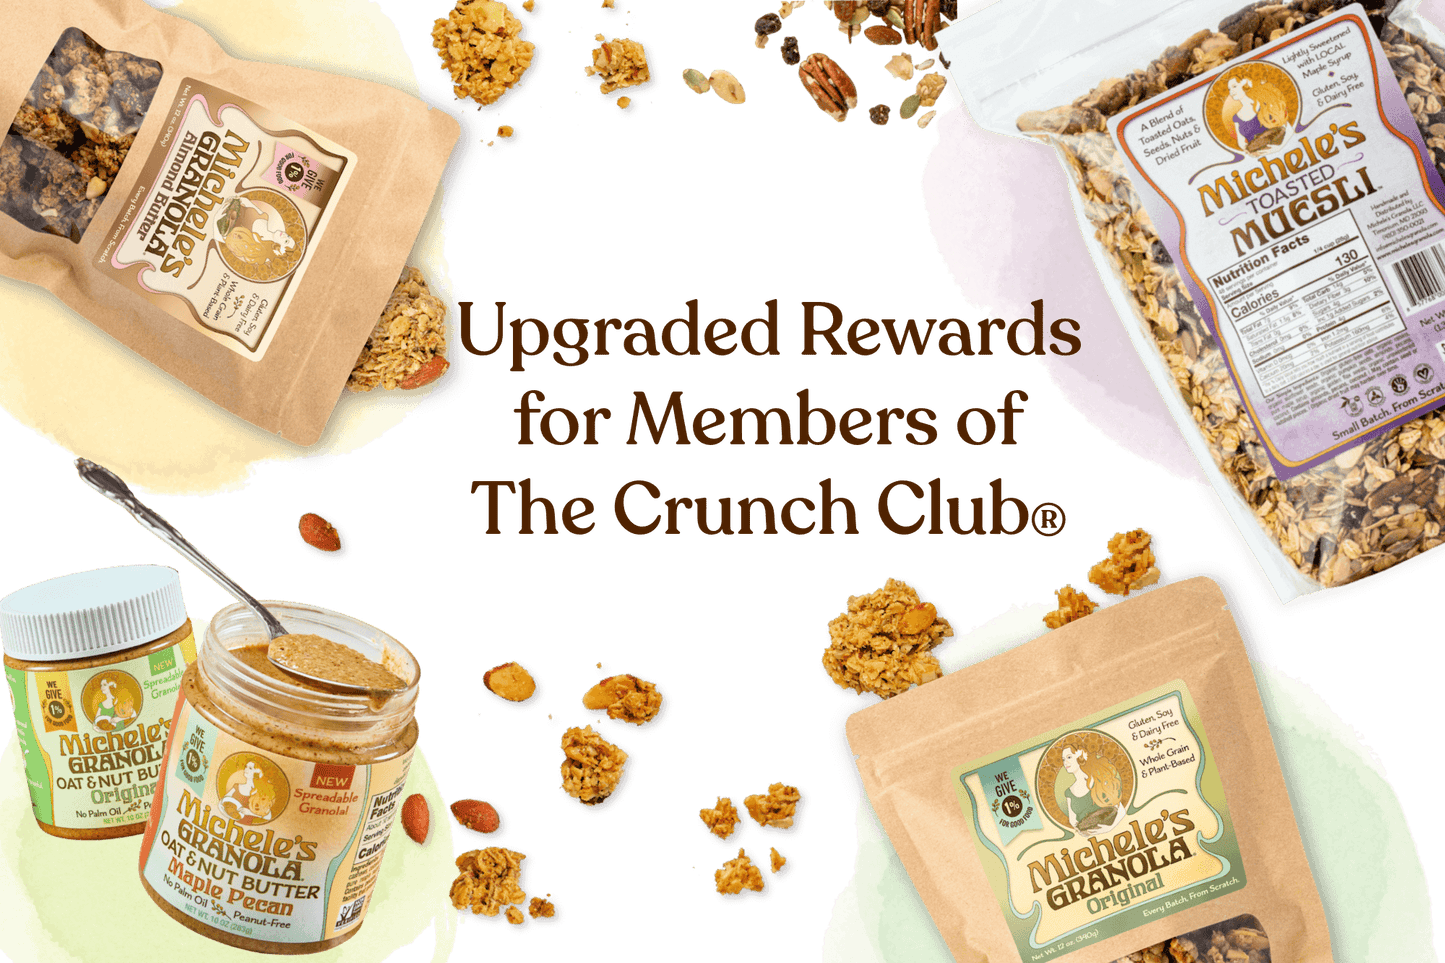 Upgraded Rewards for Members of The Crunch Club - bags of Michele's Granola, Toasted Muesli and Oat & Nut Butter granola butter